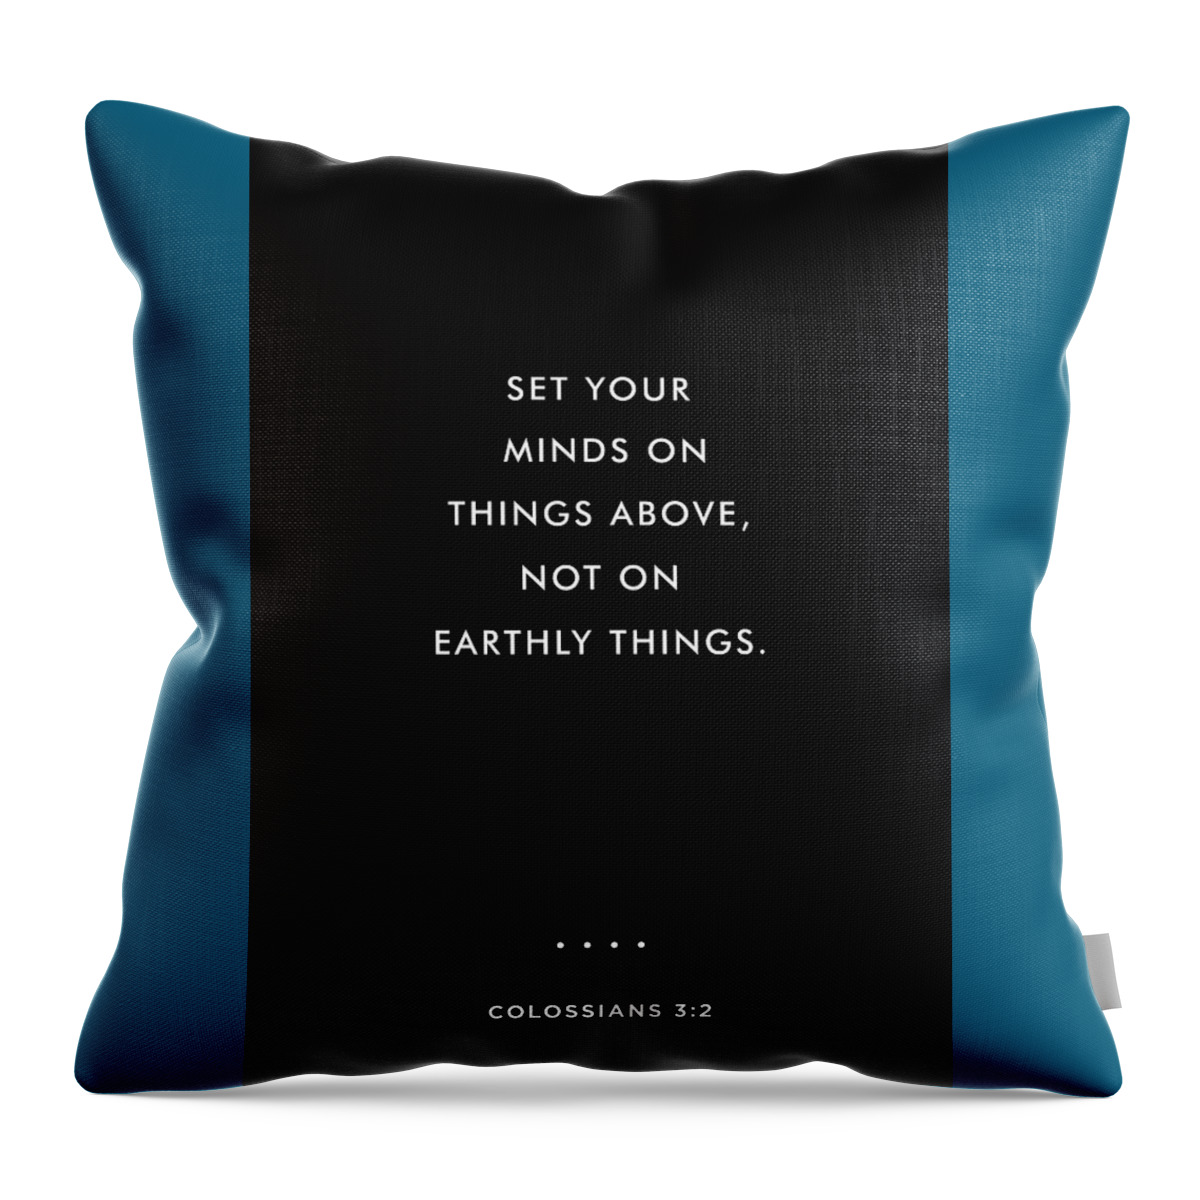 Colossians 3 2 Throw Pillow featuring the mixed media Colossians 3 2 - Minimal Bible Verses - Christian - Bible Quote Poster - Scripture, Spiritual by Studio Grafiikka